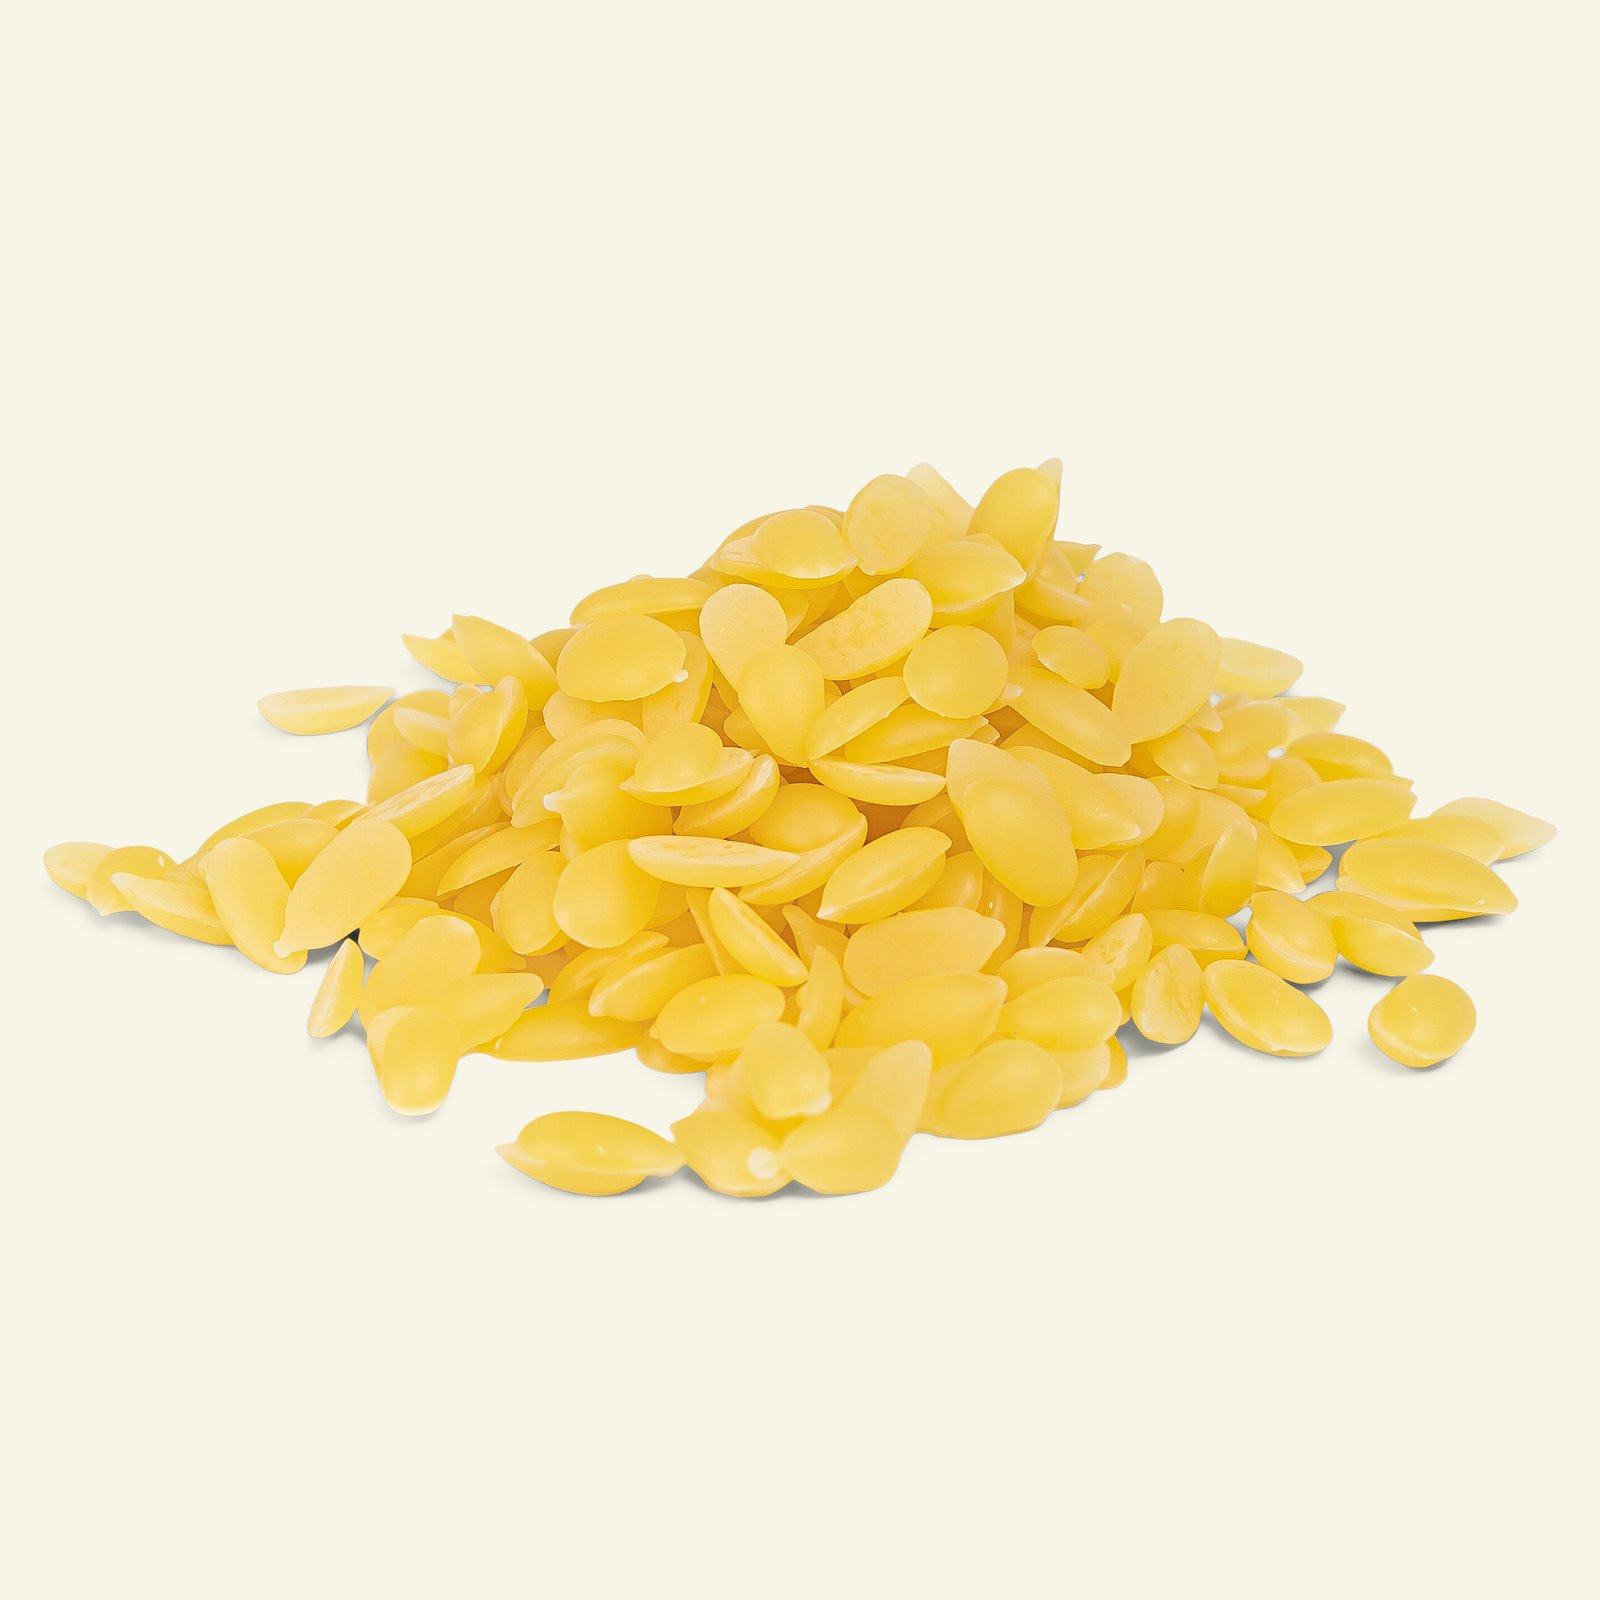 Beeswax granulate 100g 39096_pack